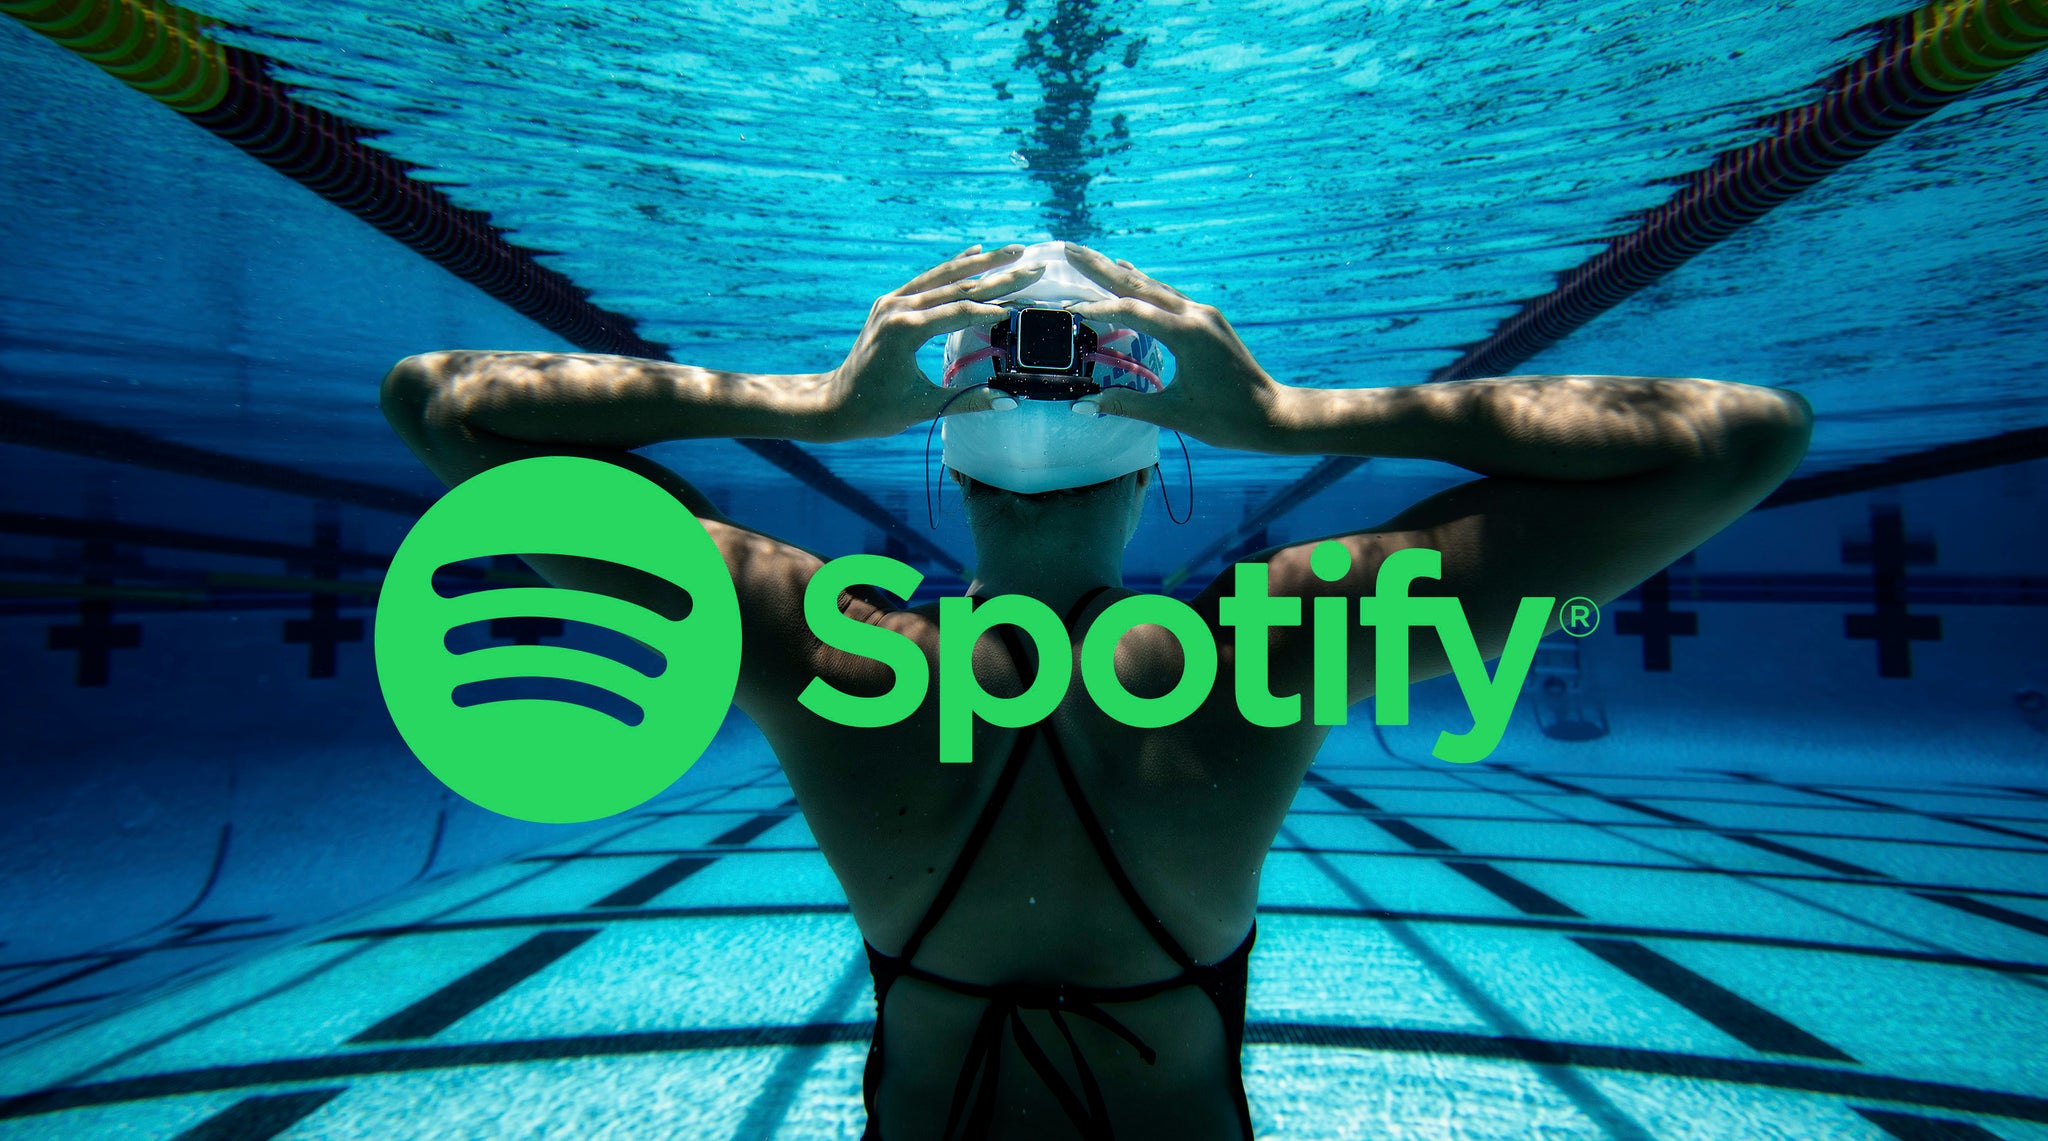 Listen to streaming music while swimming - Spotify, Apple Music, and o